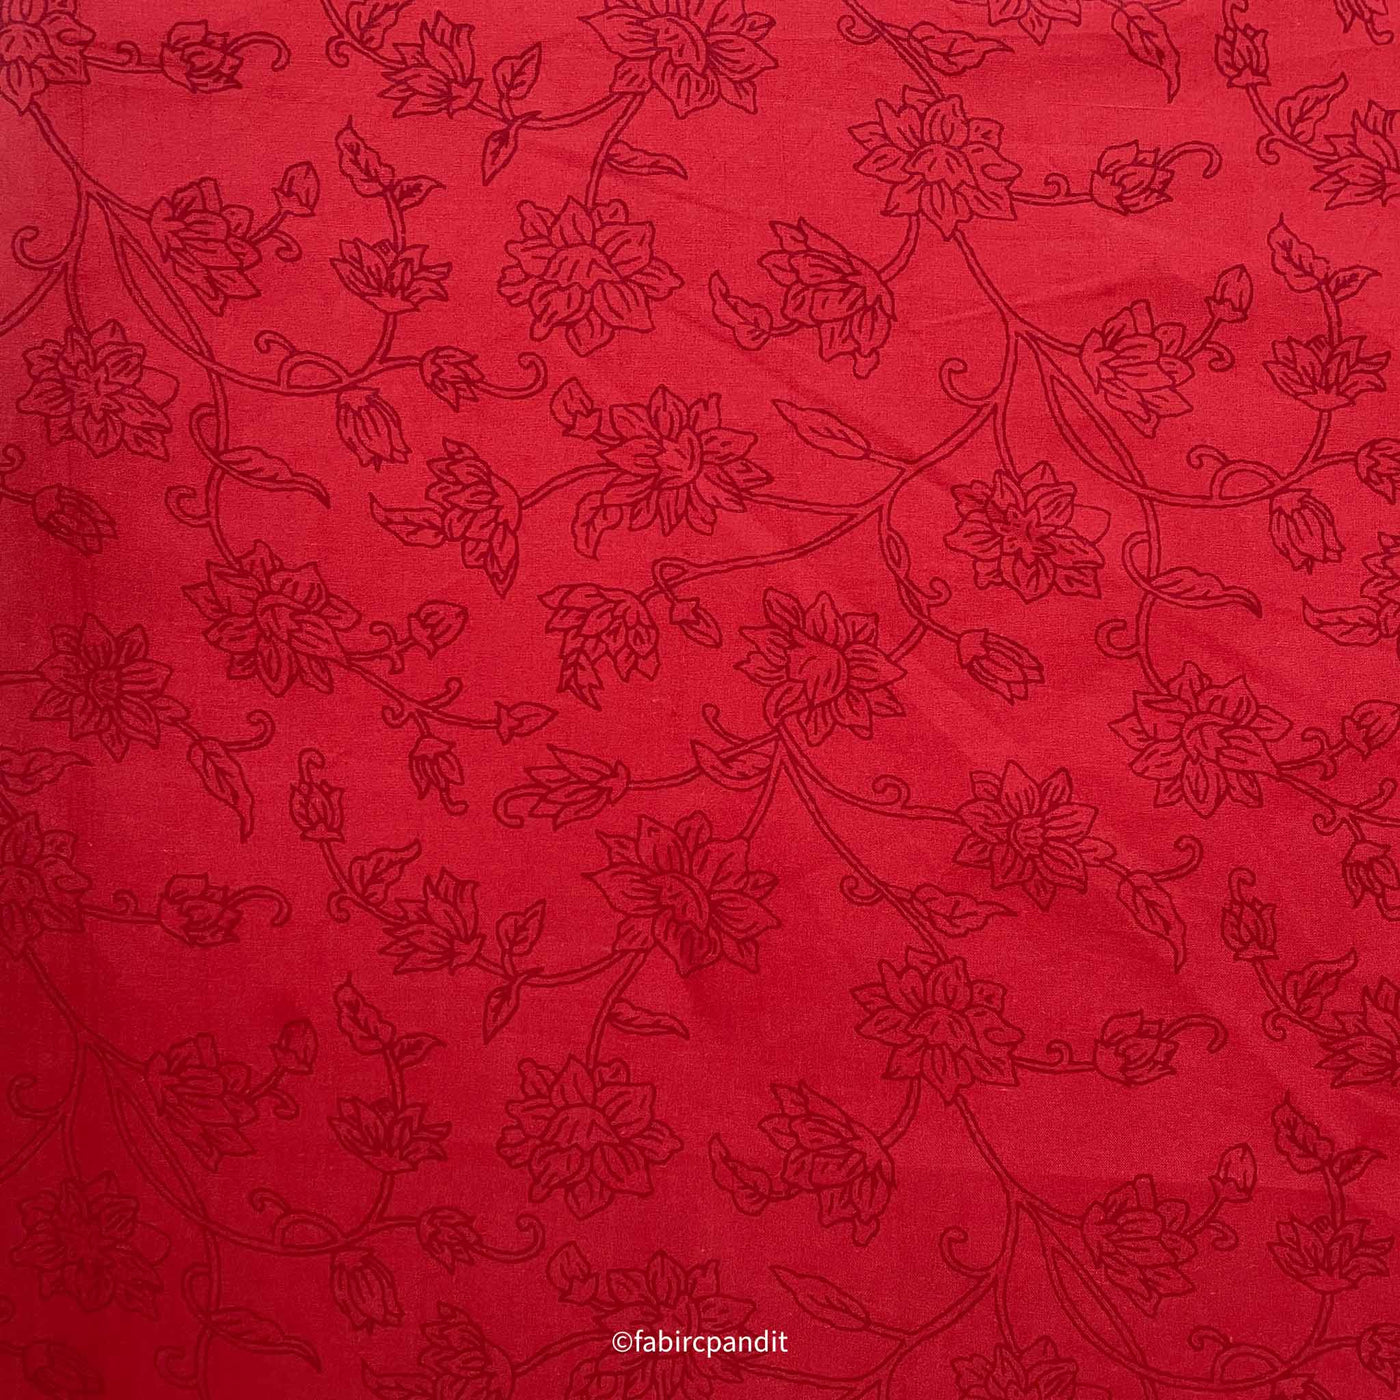 Fabric Pandit Fabric Bright Red Monochrome Floral Vines Hand Block Printed Pure Cotton Fabric (Width 43 inches)